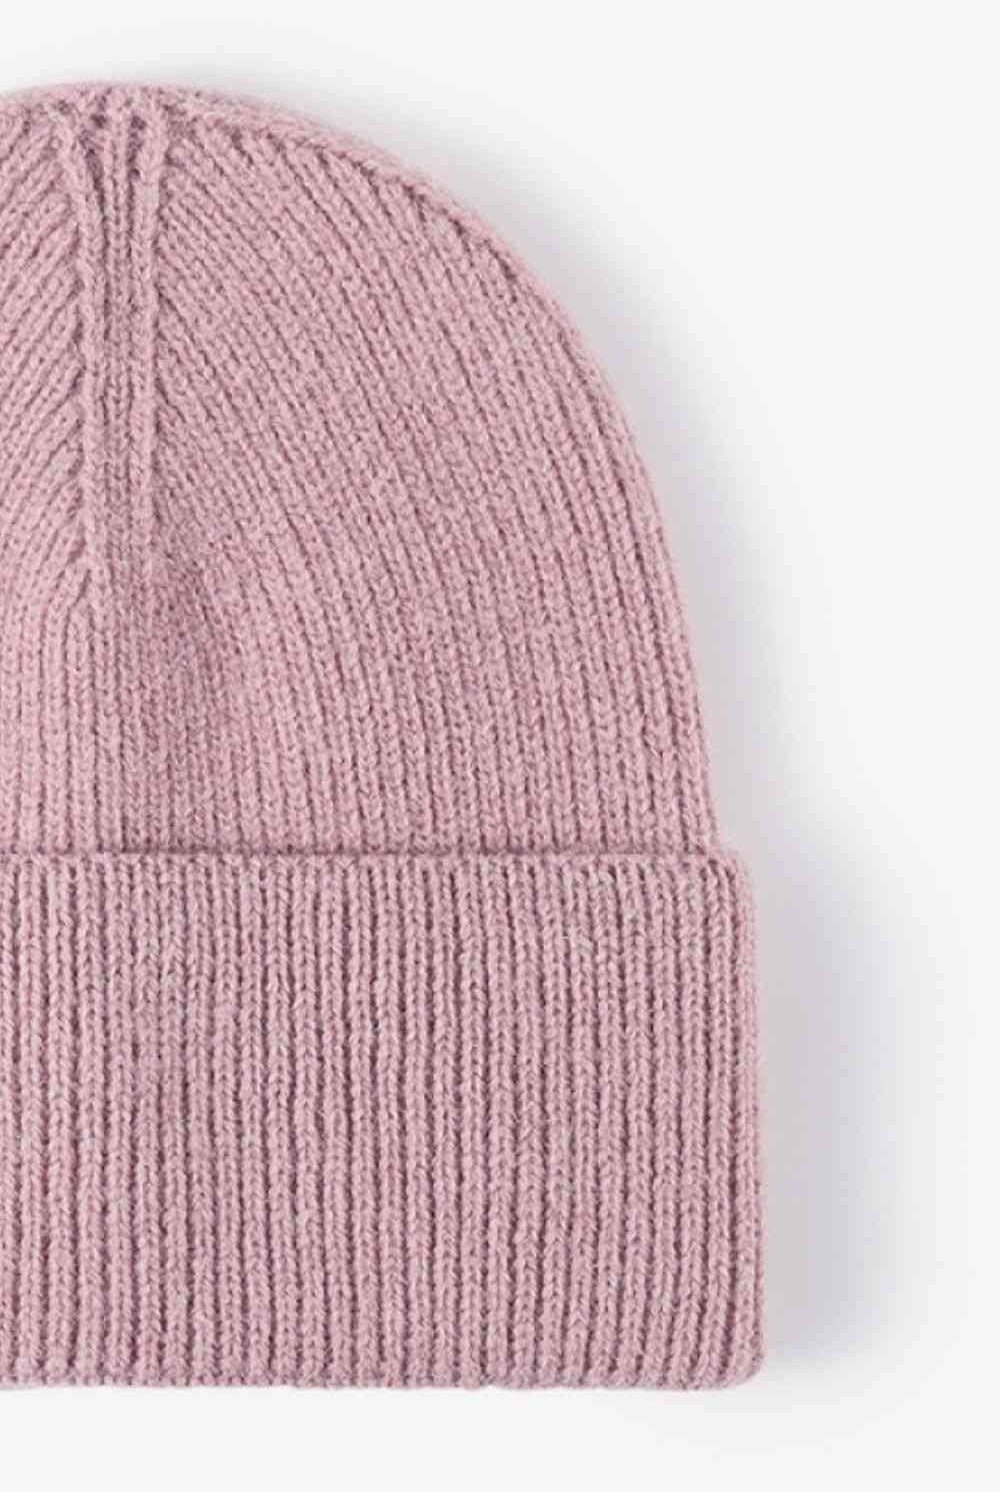 Light Gray Warm In Chilly Days Knit Beanie Winter Accessories